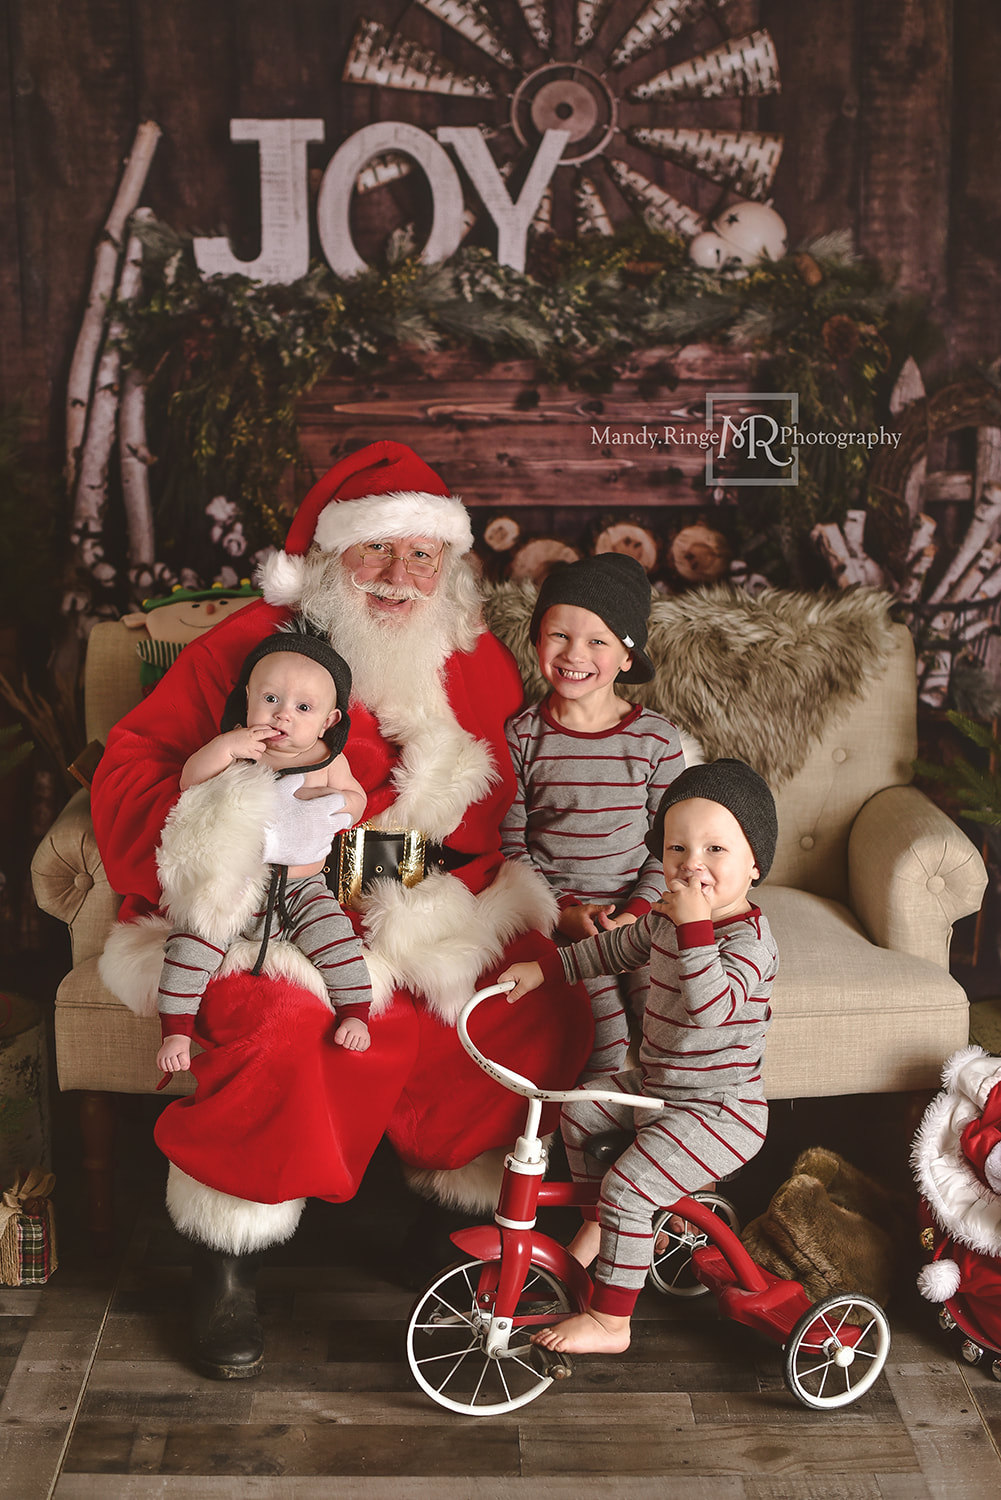 Santa mini session // Christmas, Santa Claus, Reindeer, Baby Dream Backdrops, rustic // by Mandy Ringe Photography // St. Charles, IL Photographer